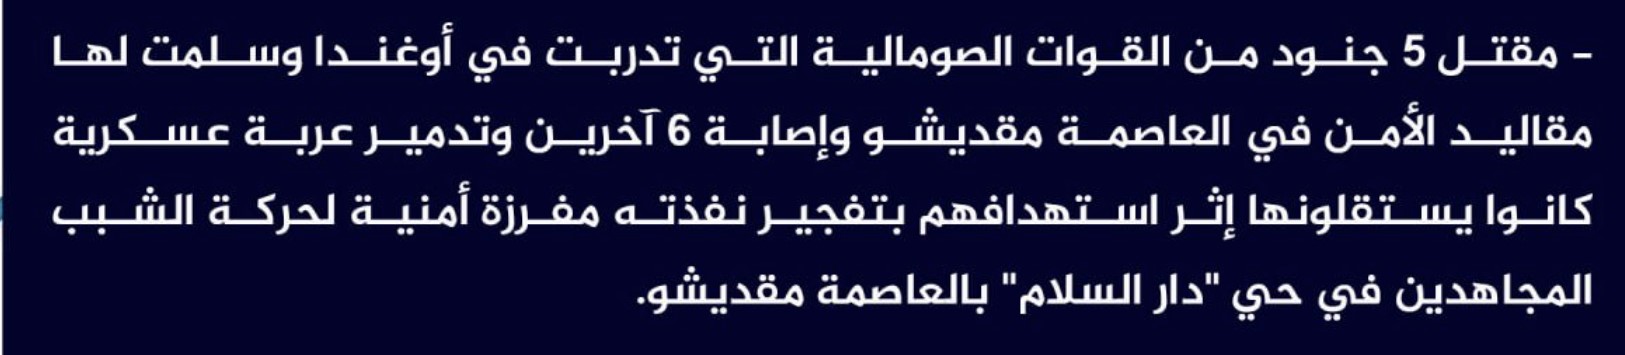 (Claim) al-Shabaab Killed Five Somalian Forces, Who Trained in Uganda, Injured Six Others and Destroyed Their Vehicle With IED in Dar al-Salam District, Mogadishu, Somalia - 9 August 2023